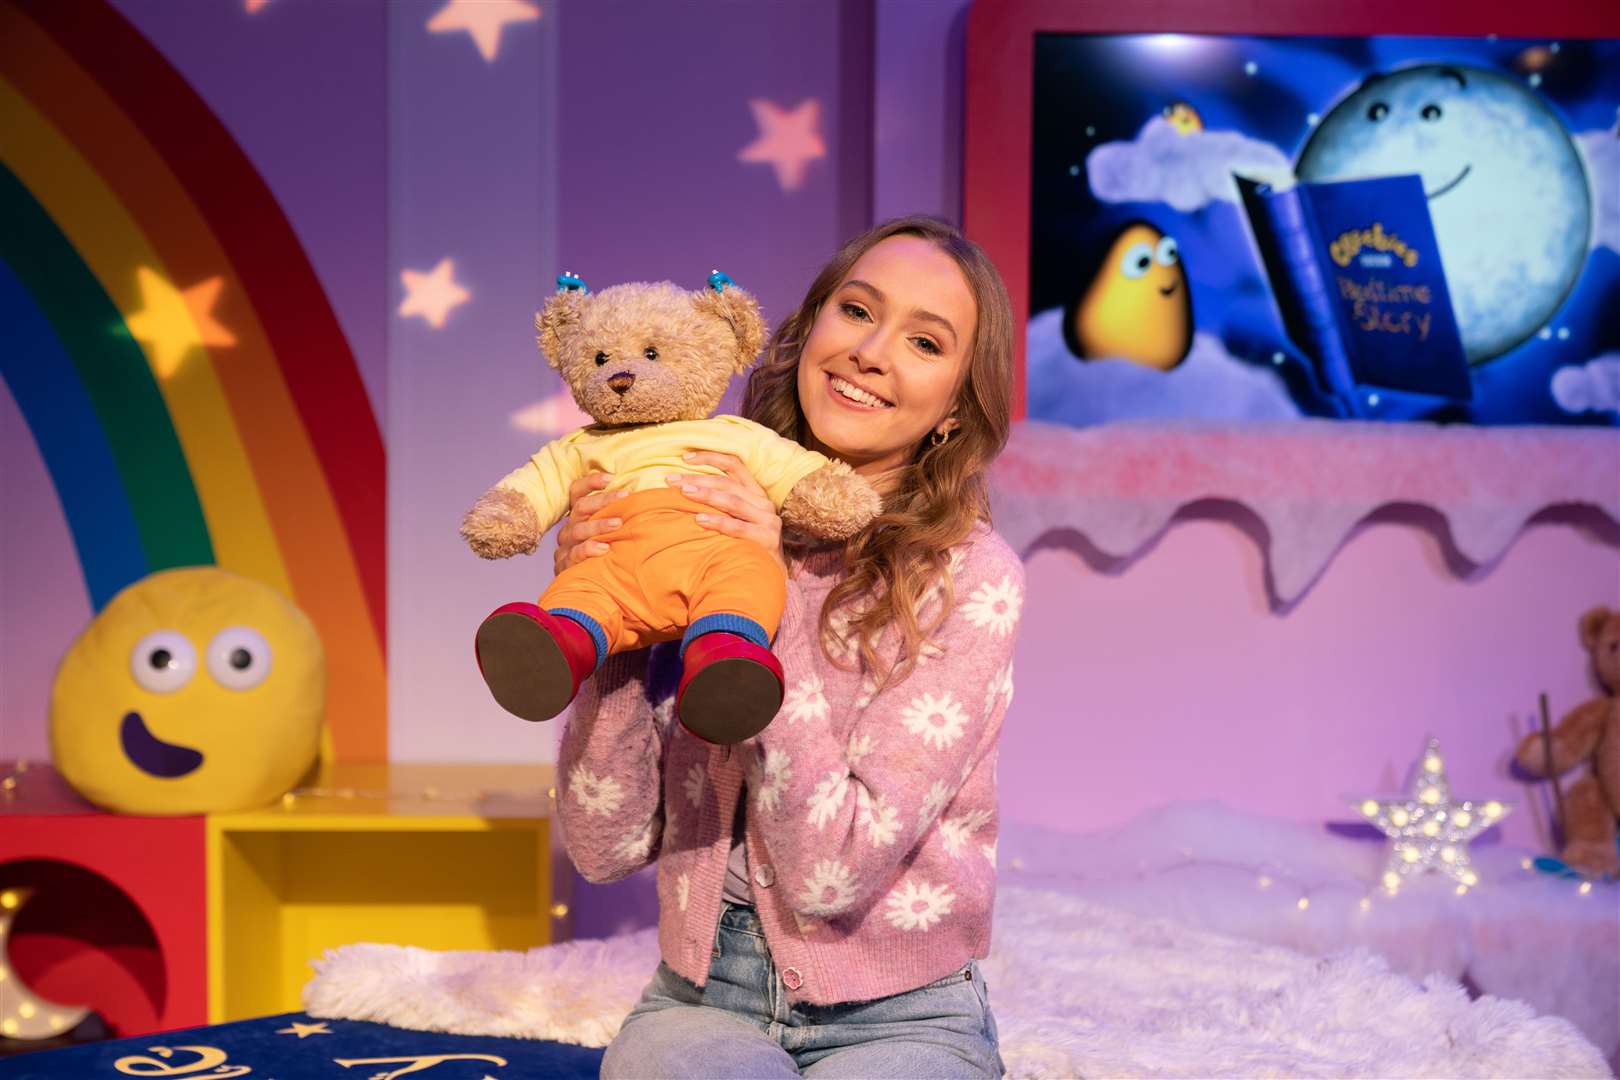 Rose Ayling-Ellis is the first celebrity to sign a Cbeebies Bedtime Story